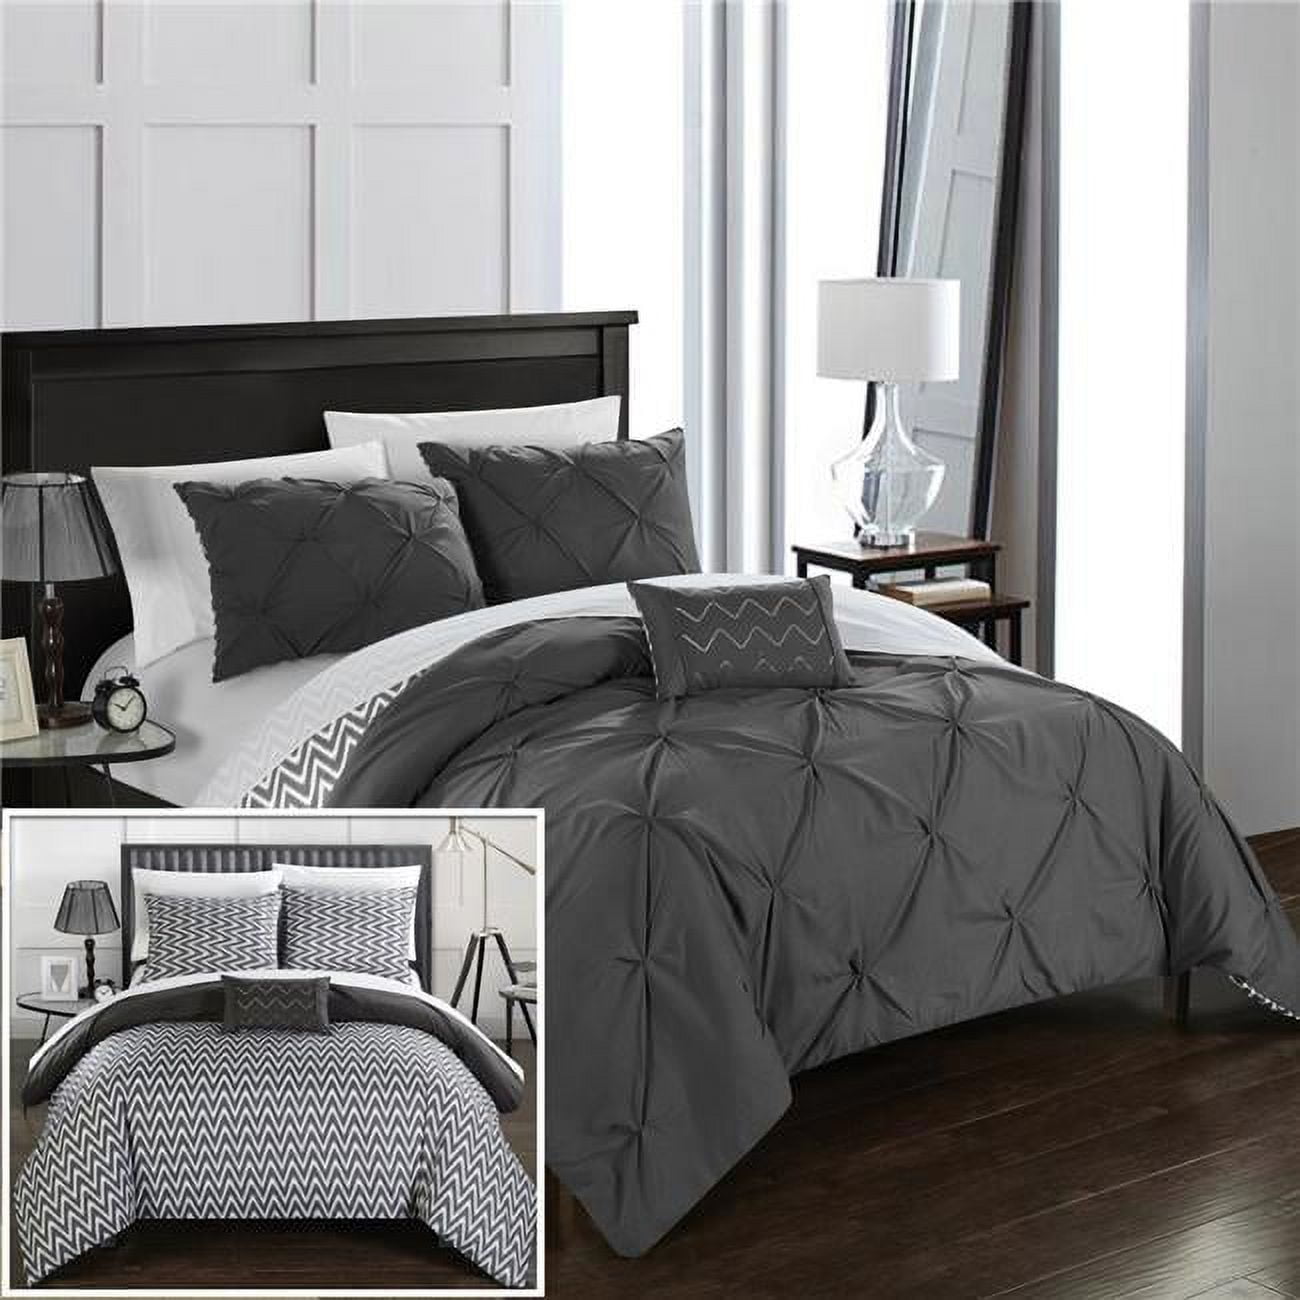 Everly Pinch Pleated, Reversible Chevron Print Ruffled & Pleated Complete Comforter Set With Shams & Decorative Pillows - Grey - King - 4 Piece